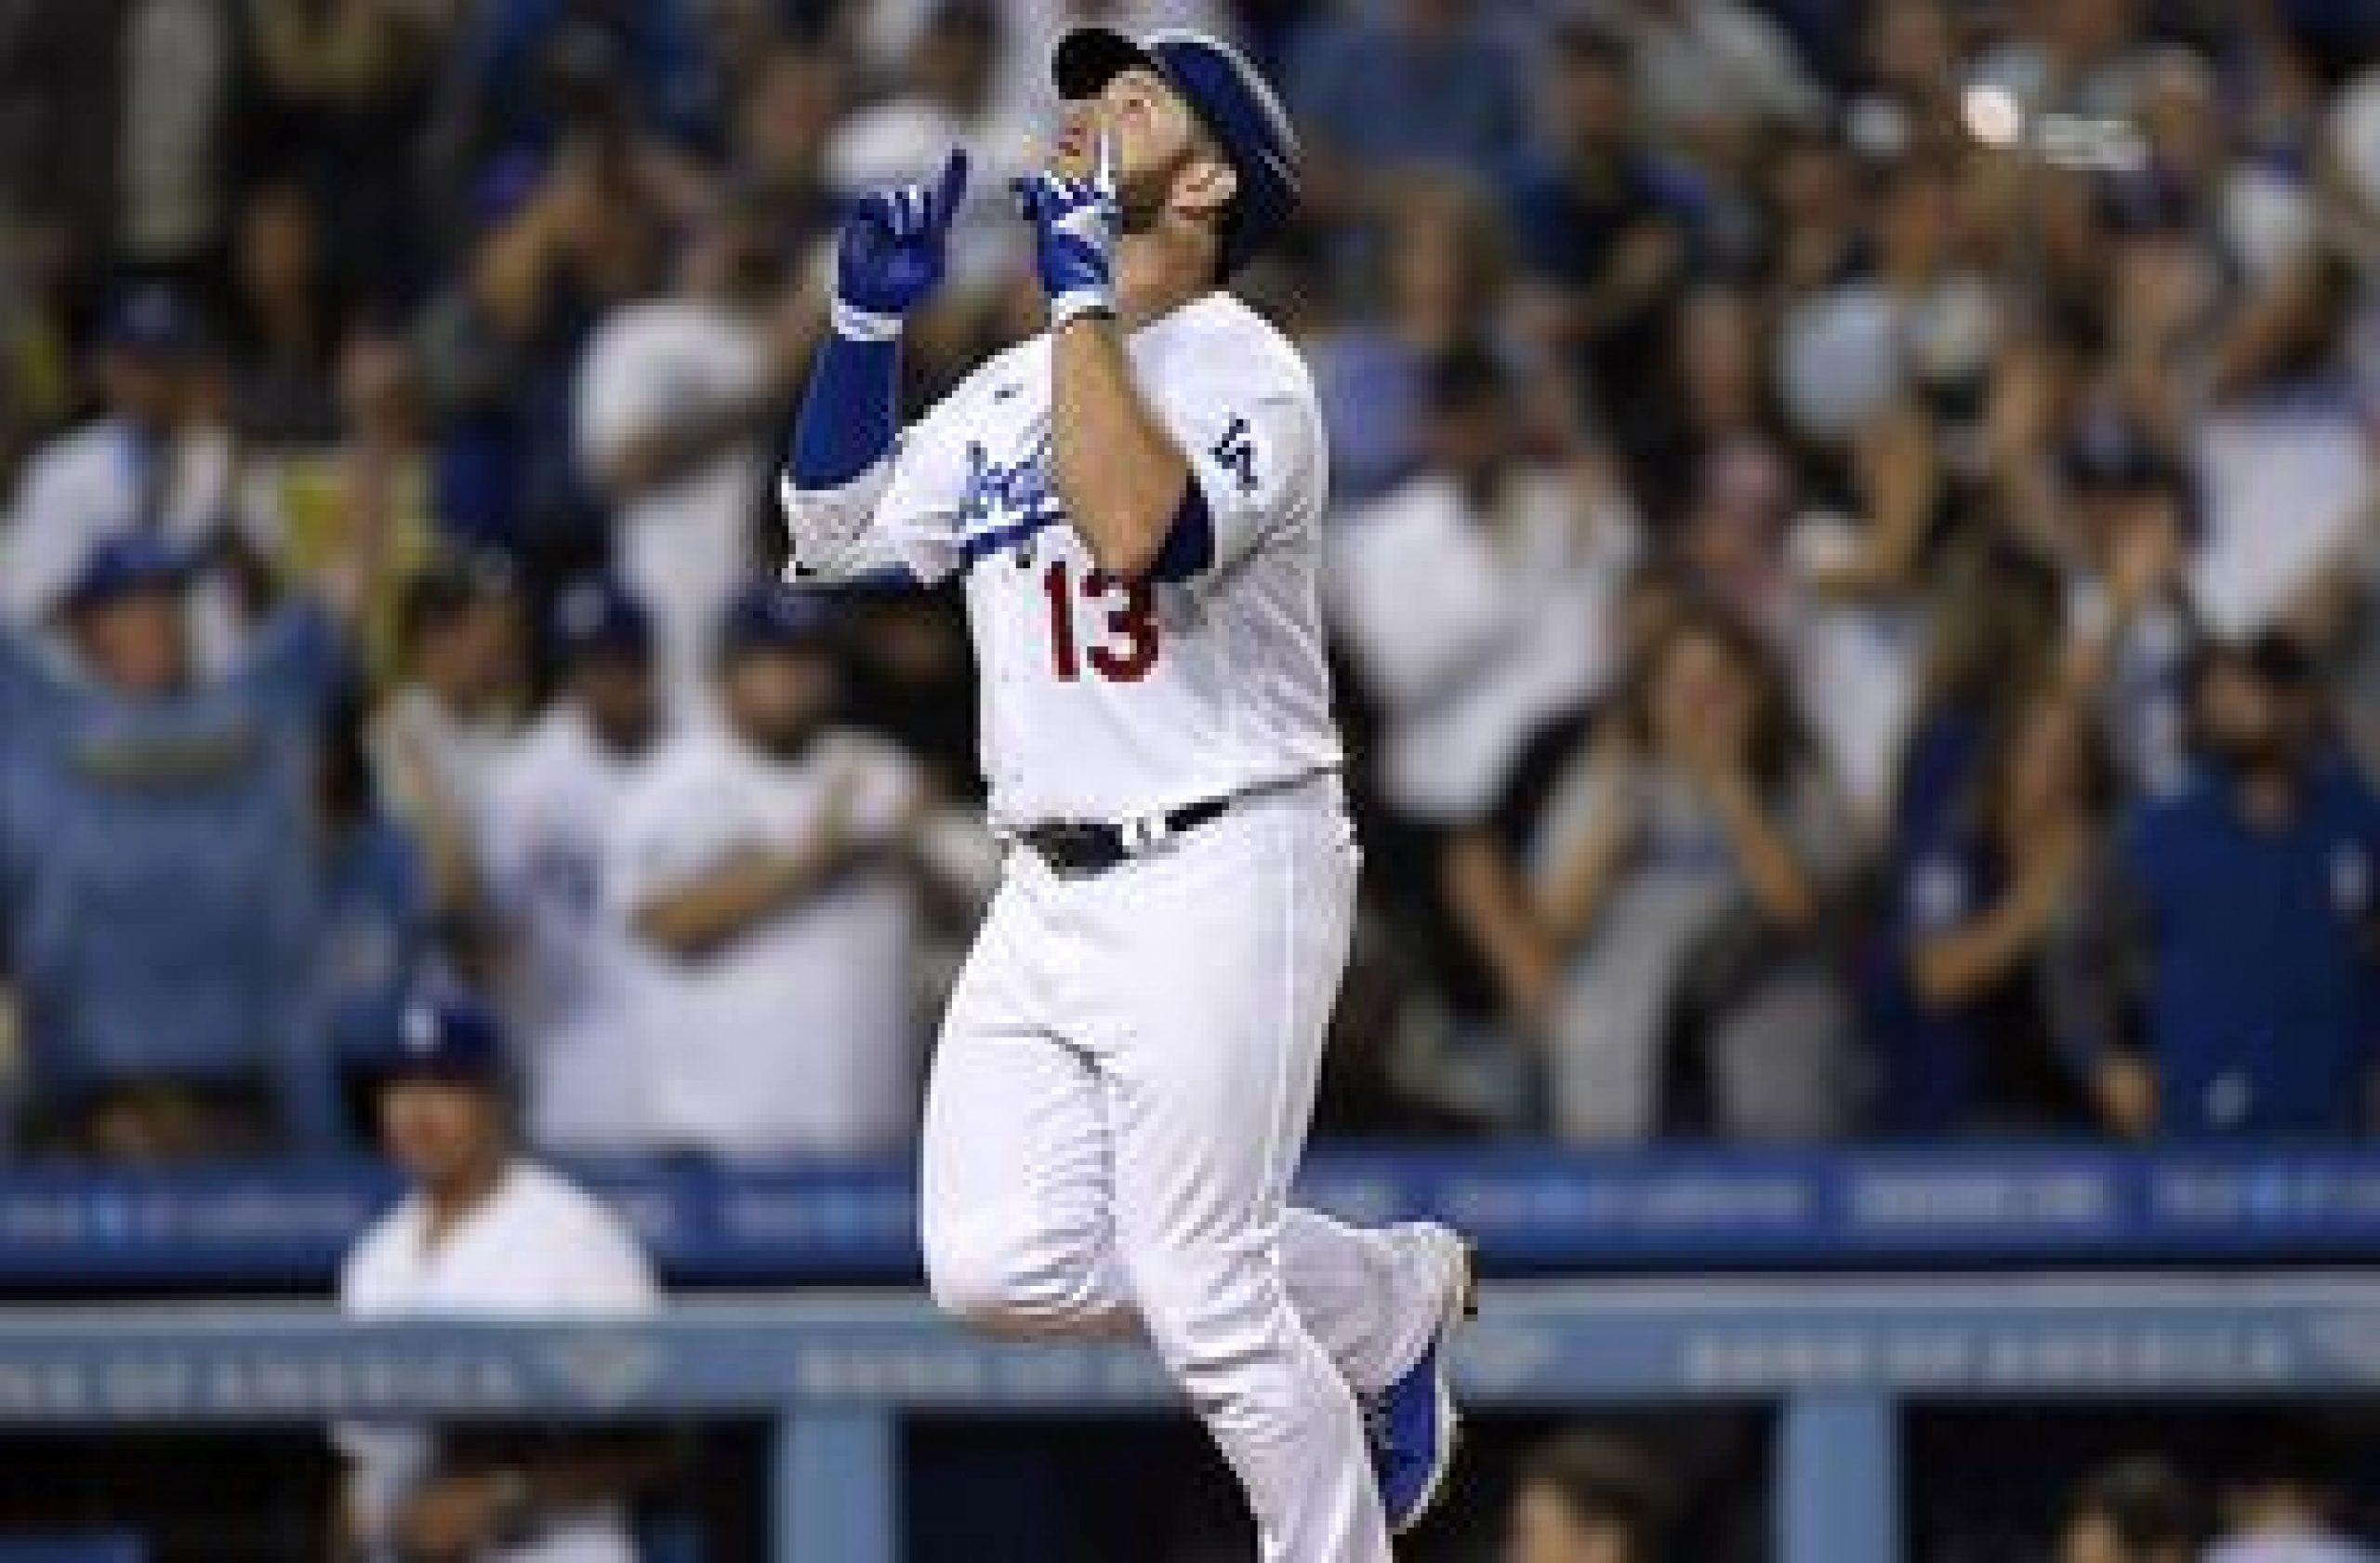 Max Muncy hits game-winning solo homer in the eighth as Dodgers beat Pirates, 2-1